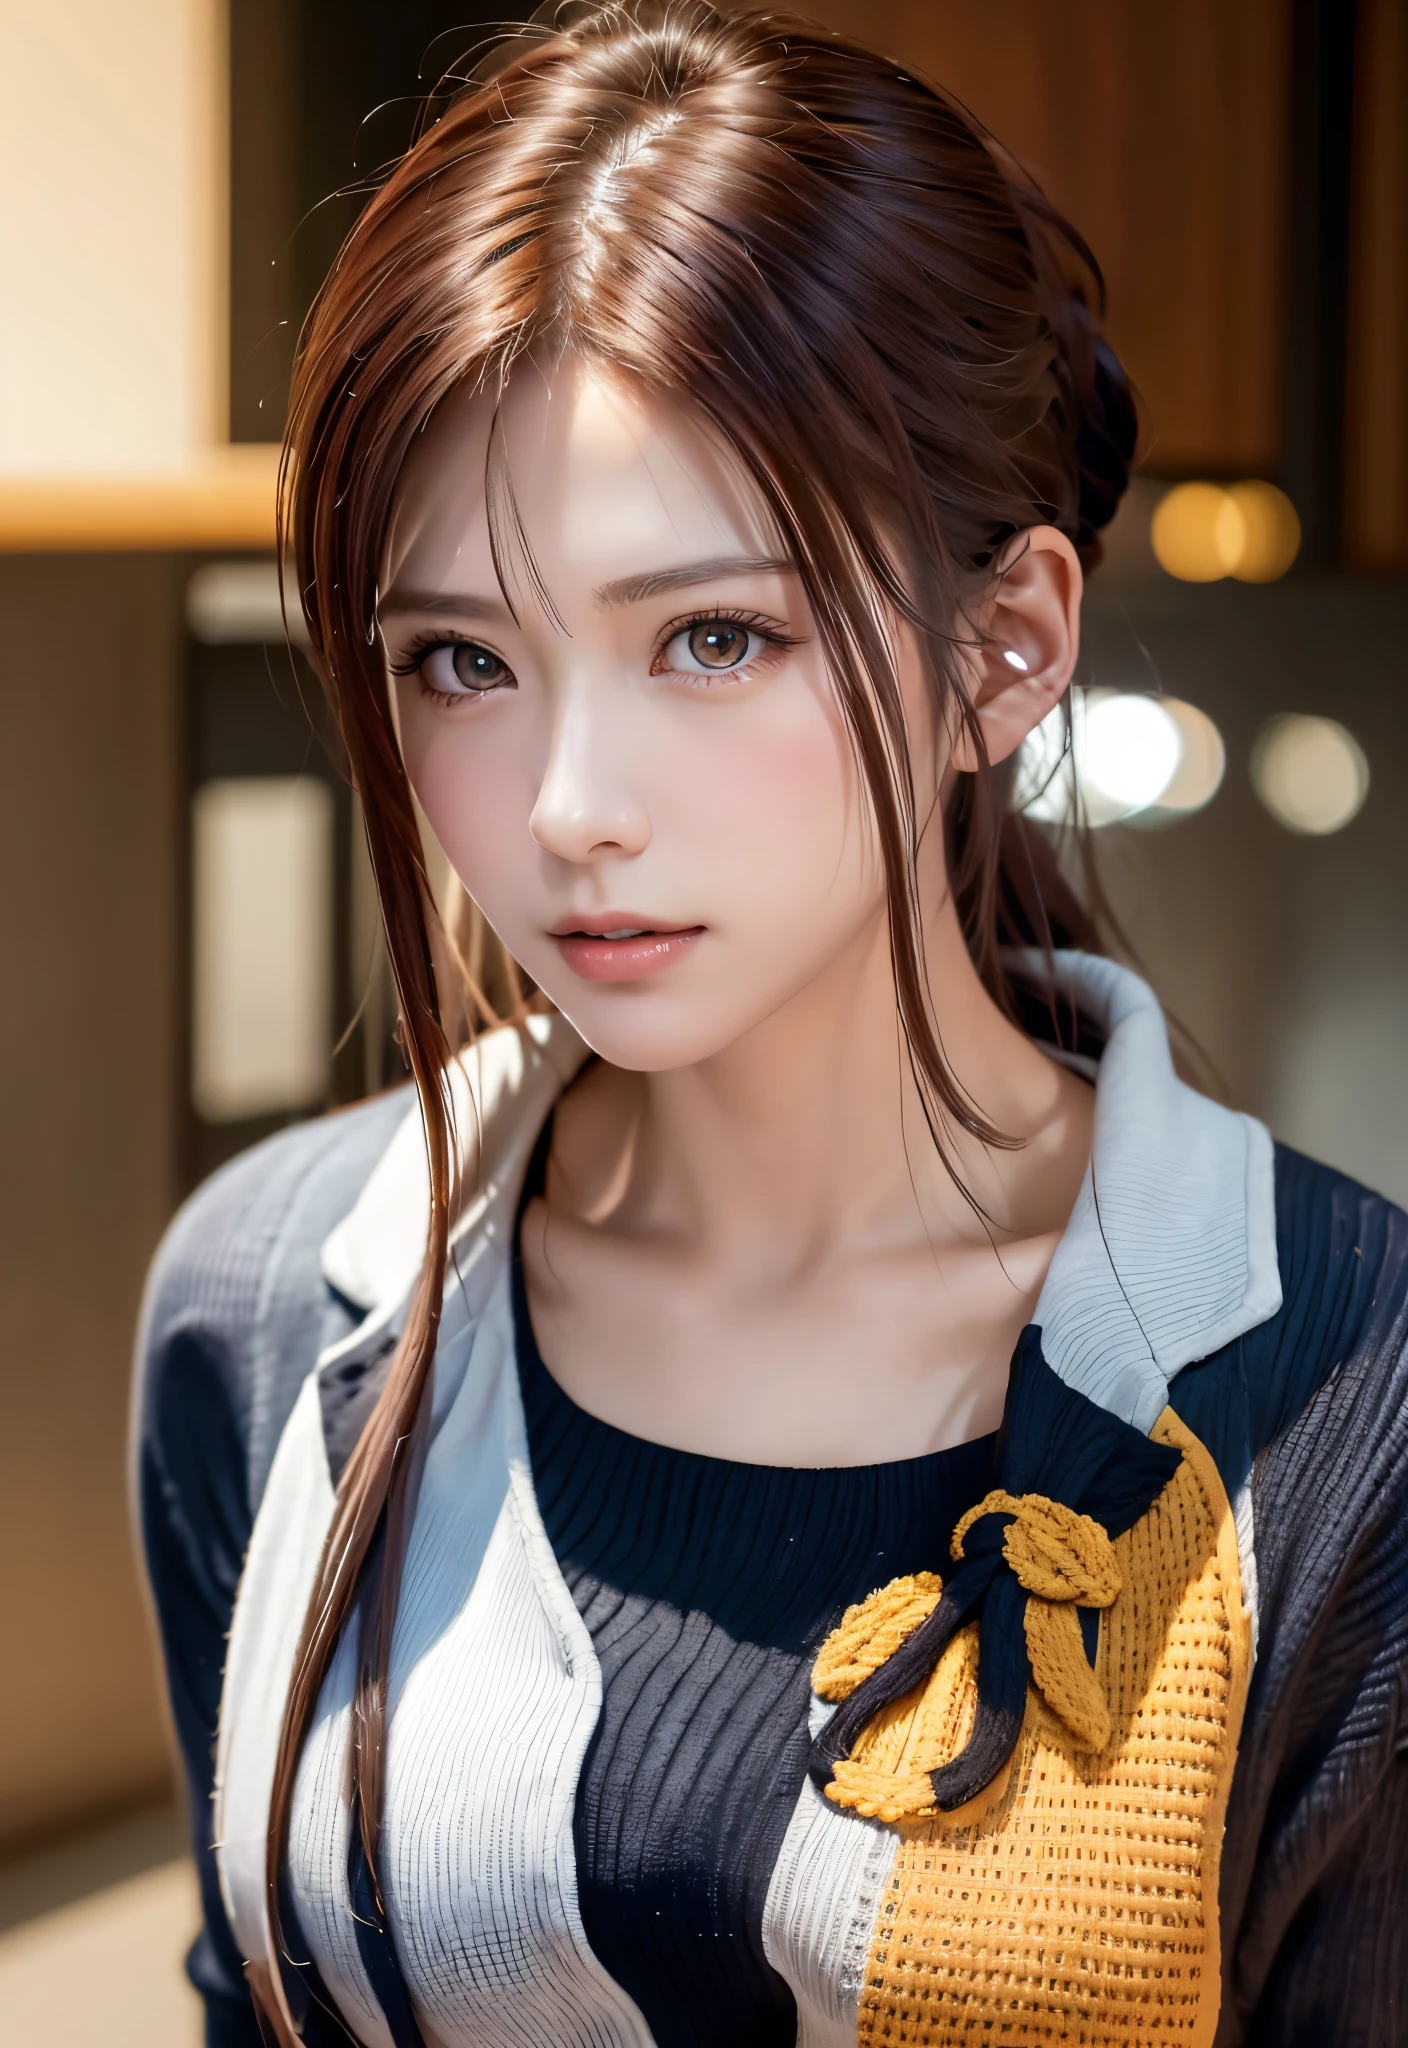 8K, of the highest quality, masutepiece:1.2), (Realistic, Photorealsitic:1.37), of the highest quality, masutepiece, Beautiful young woman, Pensive expression, Thoughtful look, Female doctor, Hair tied back, Cinematic background, Light skin tone